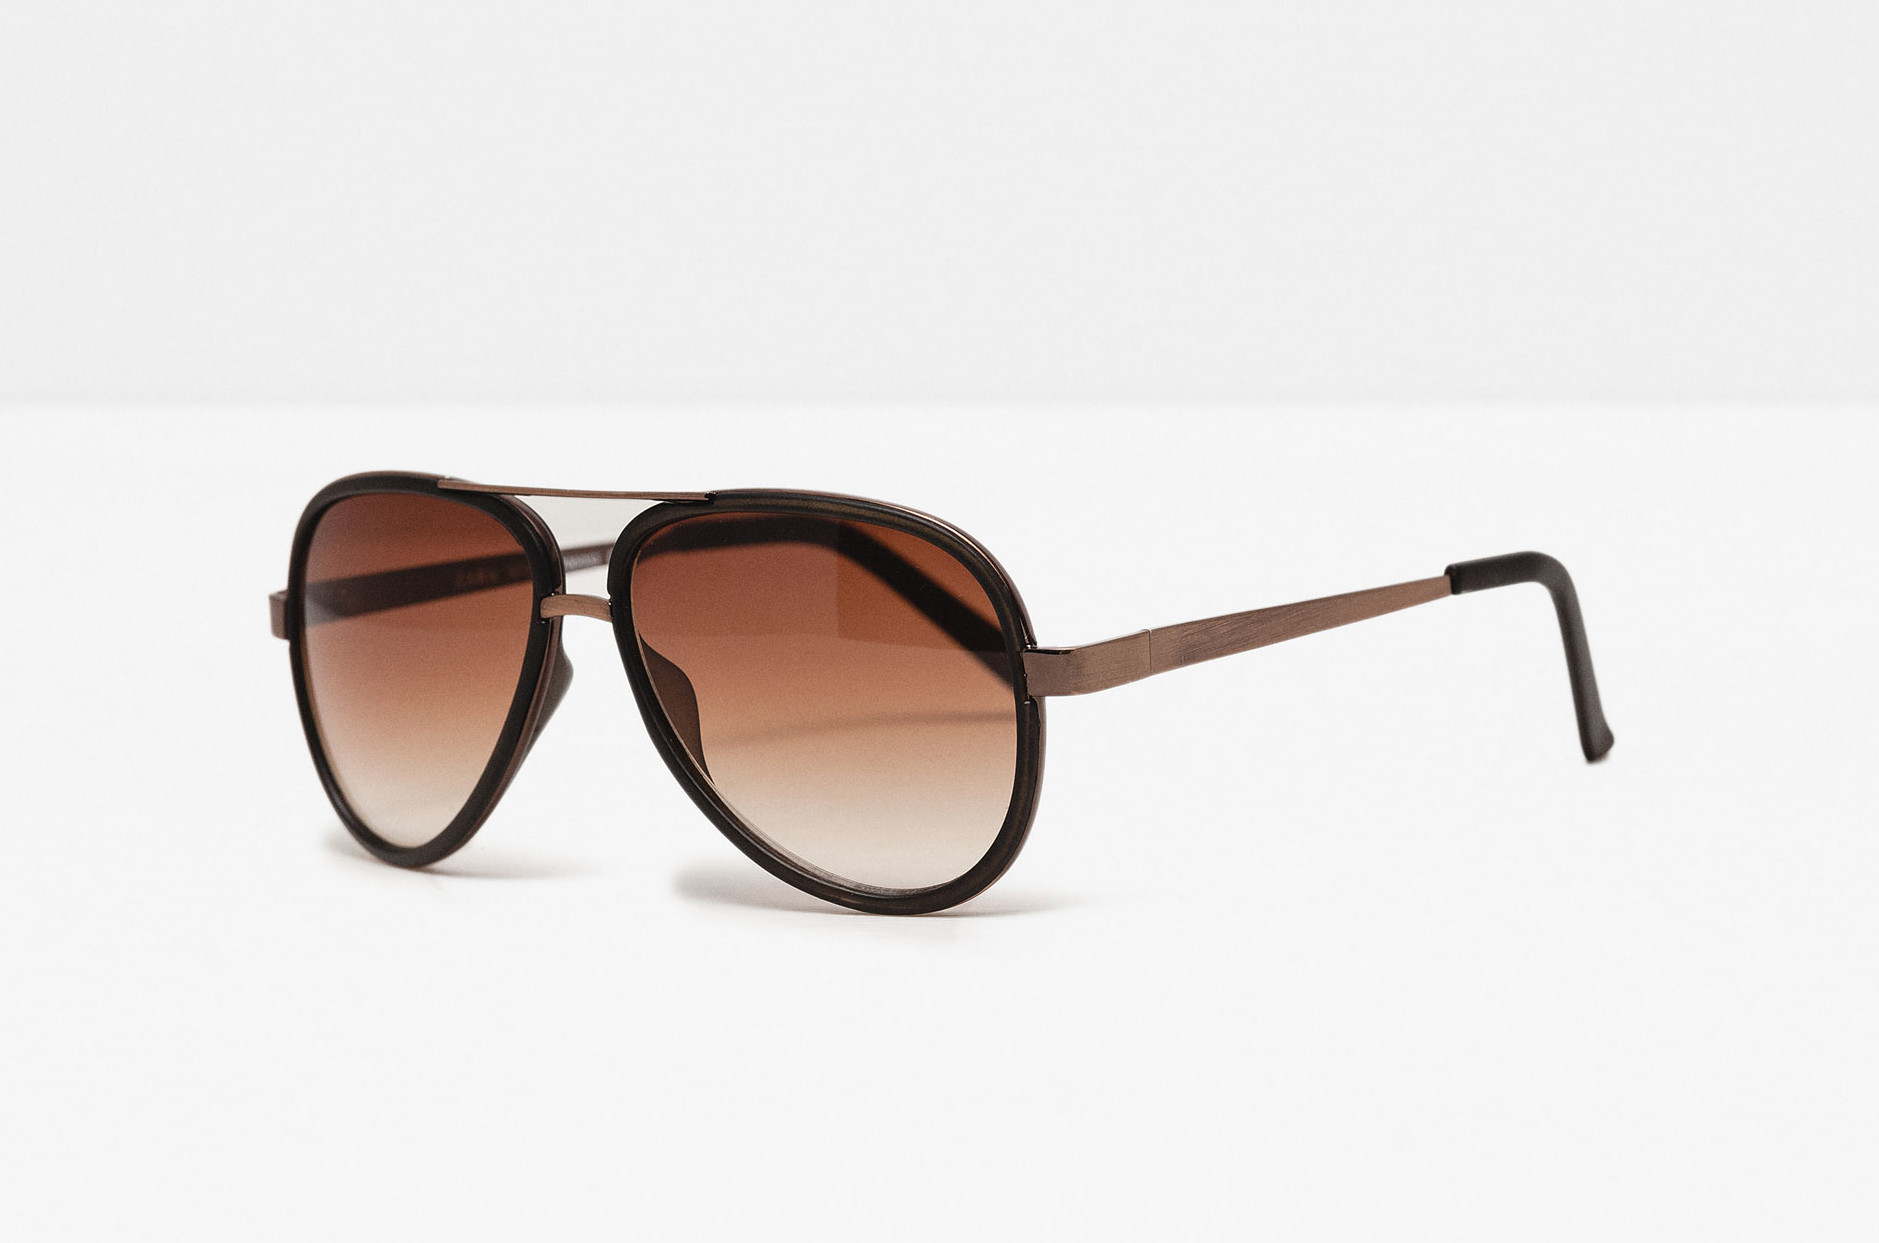 COPPER ARMS AND DETAIL SUNGLASSES